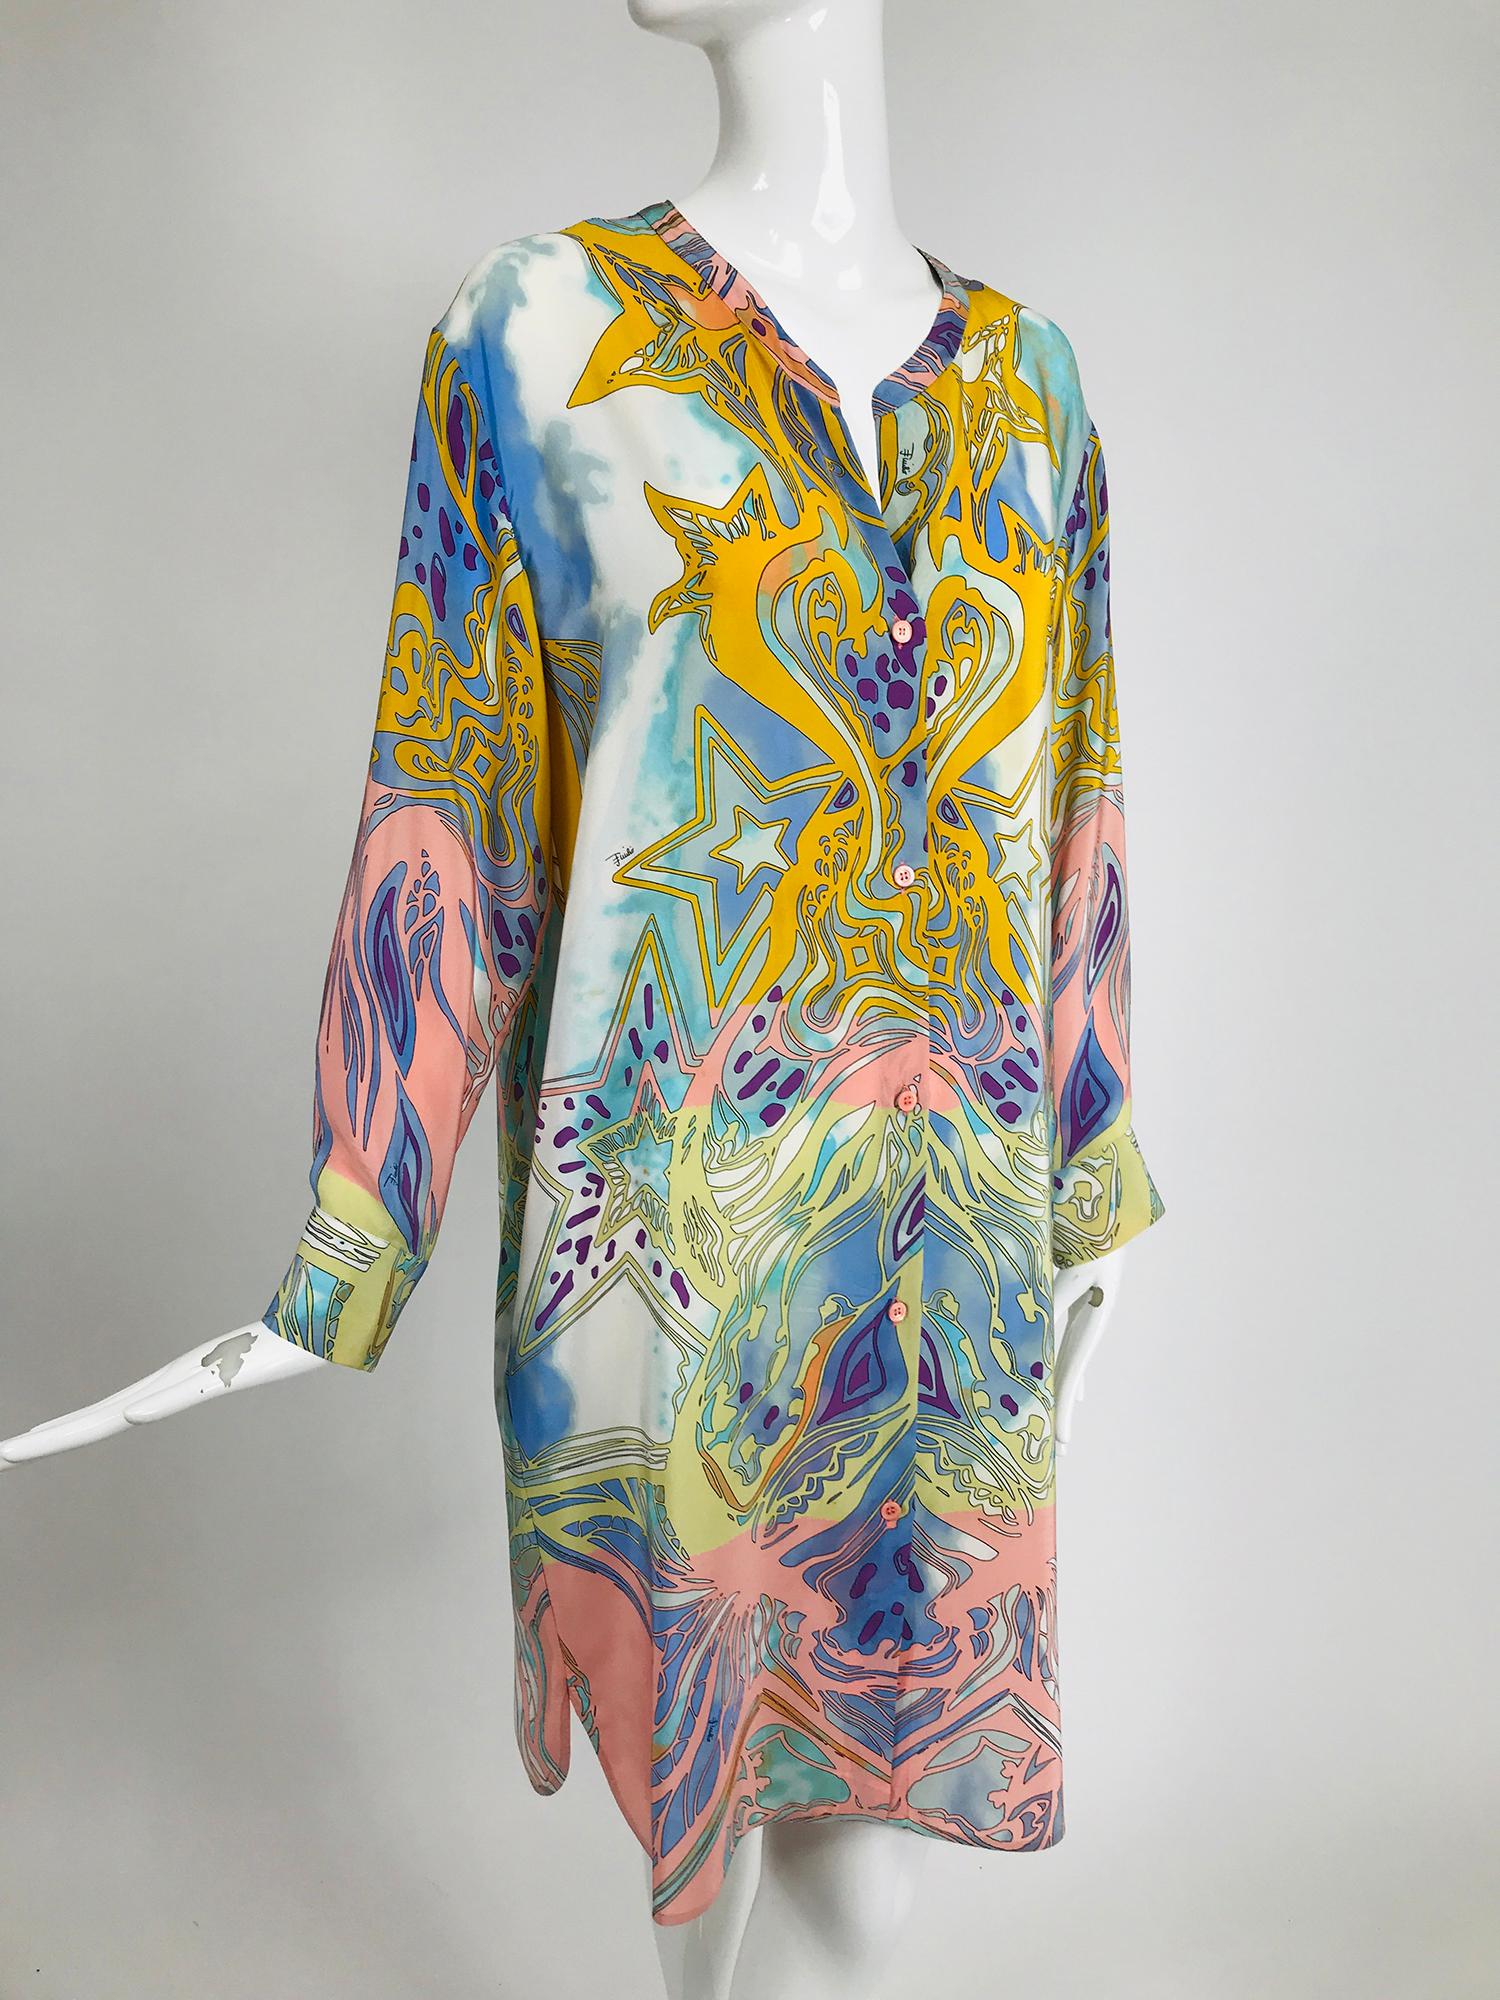 Emilio Pucci silk star print button front, long sleeve dress or cover up. Banded V neckline, long sleeves with button cuffs. The dress closes with buttons at the front, shirt tail hem. Pastel print with tie dye and stars. Unlined. Marked size 40.